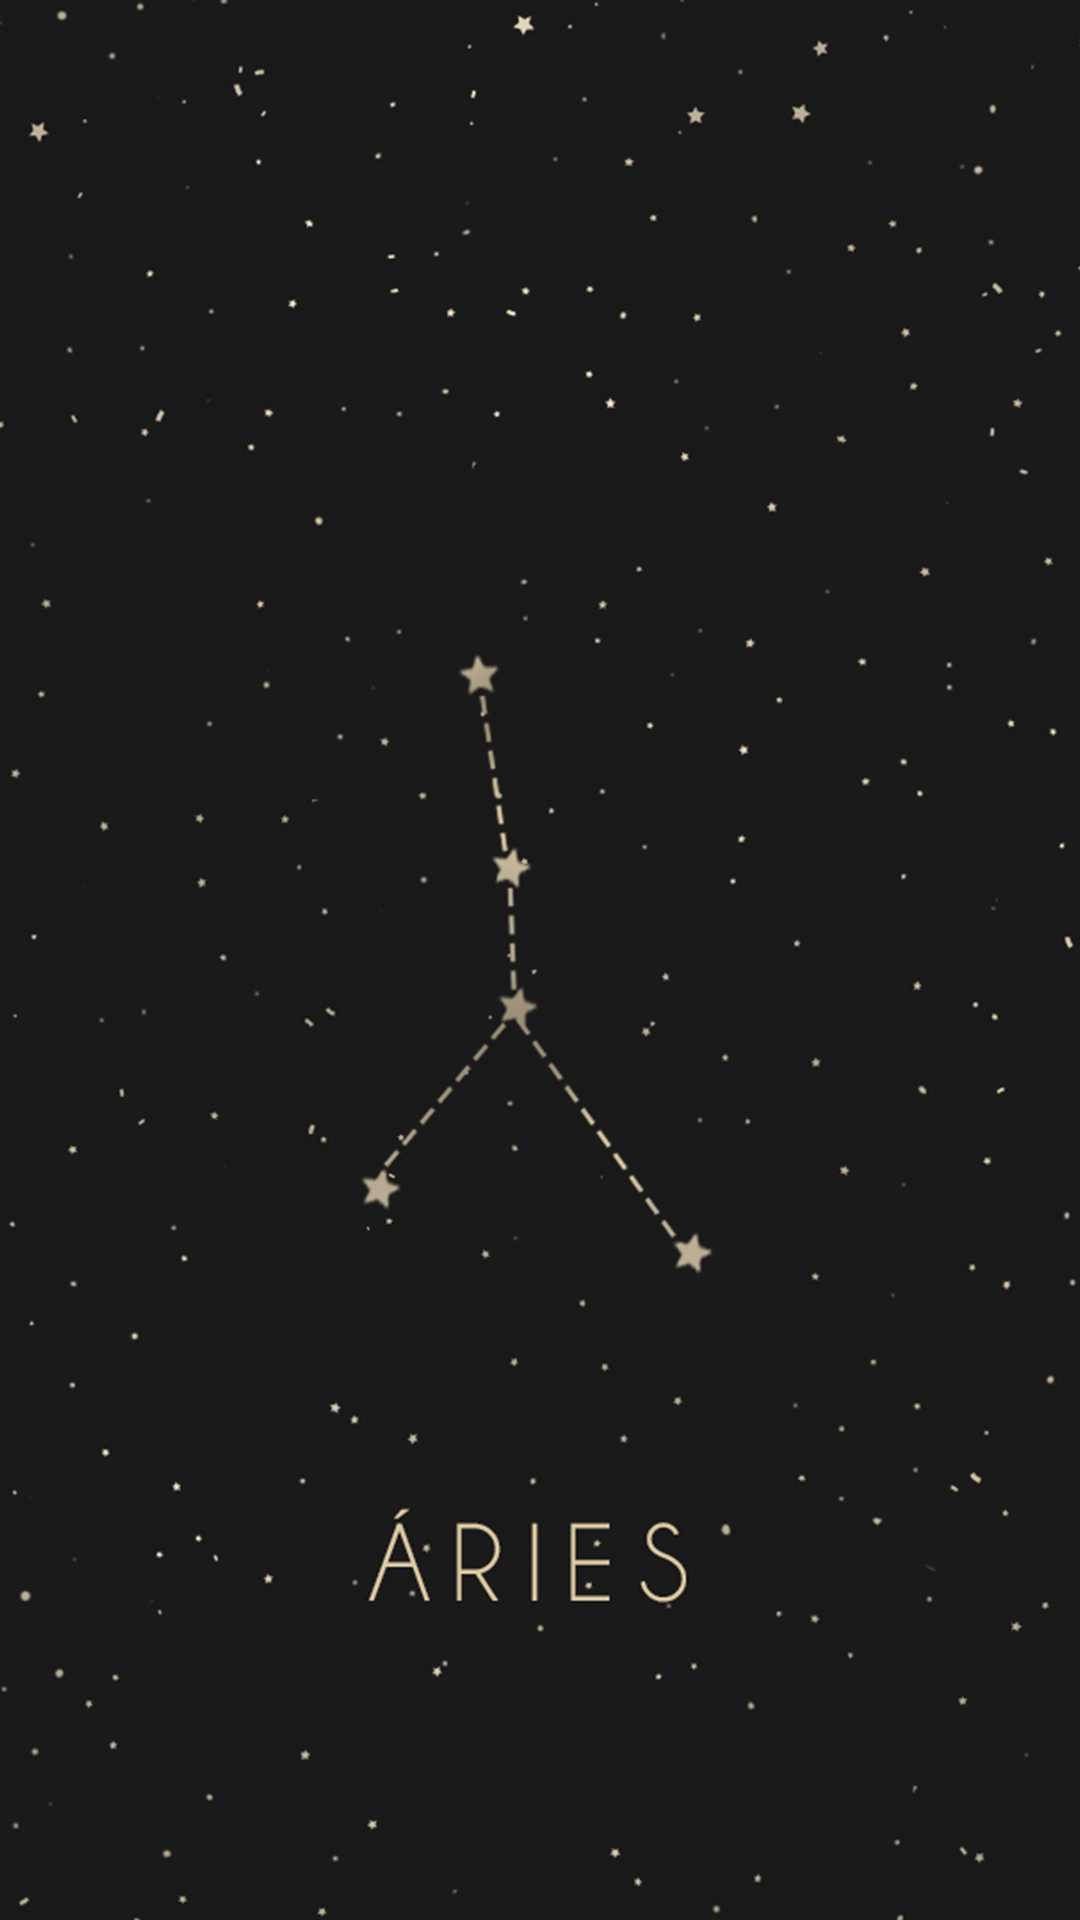 Aries sign in the sky with stars - Android, constellation, Aries